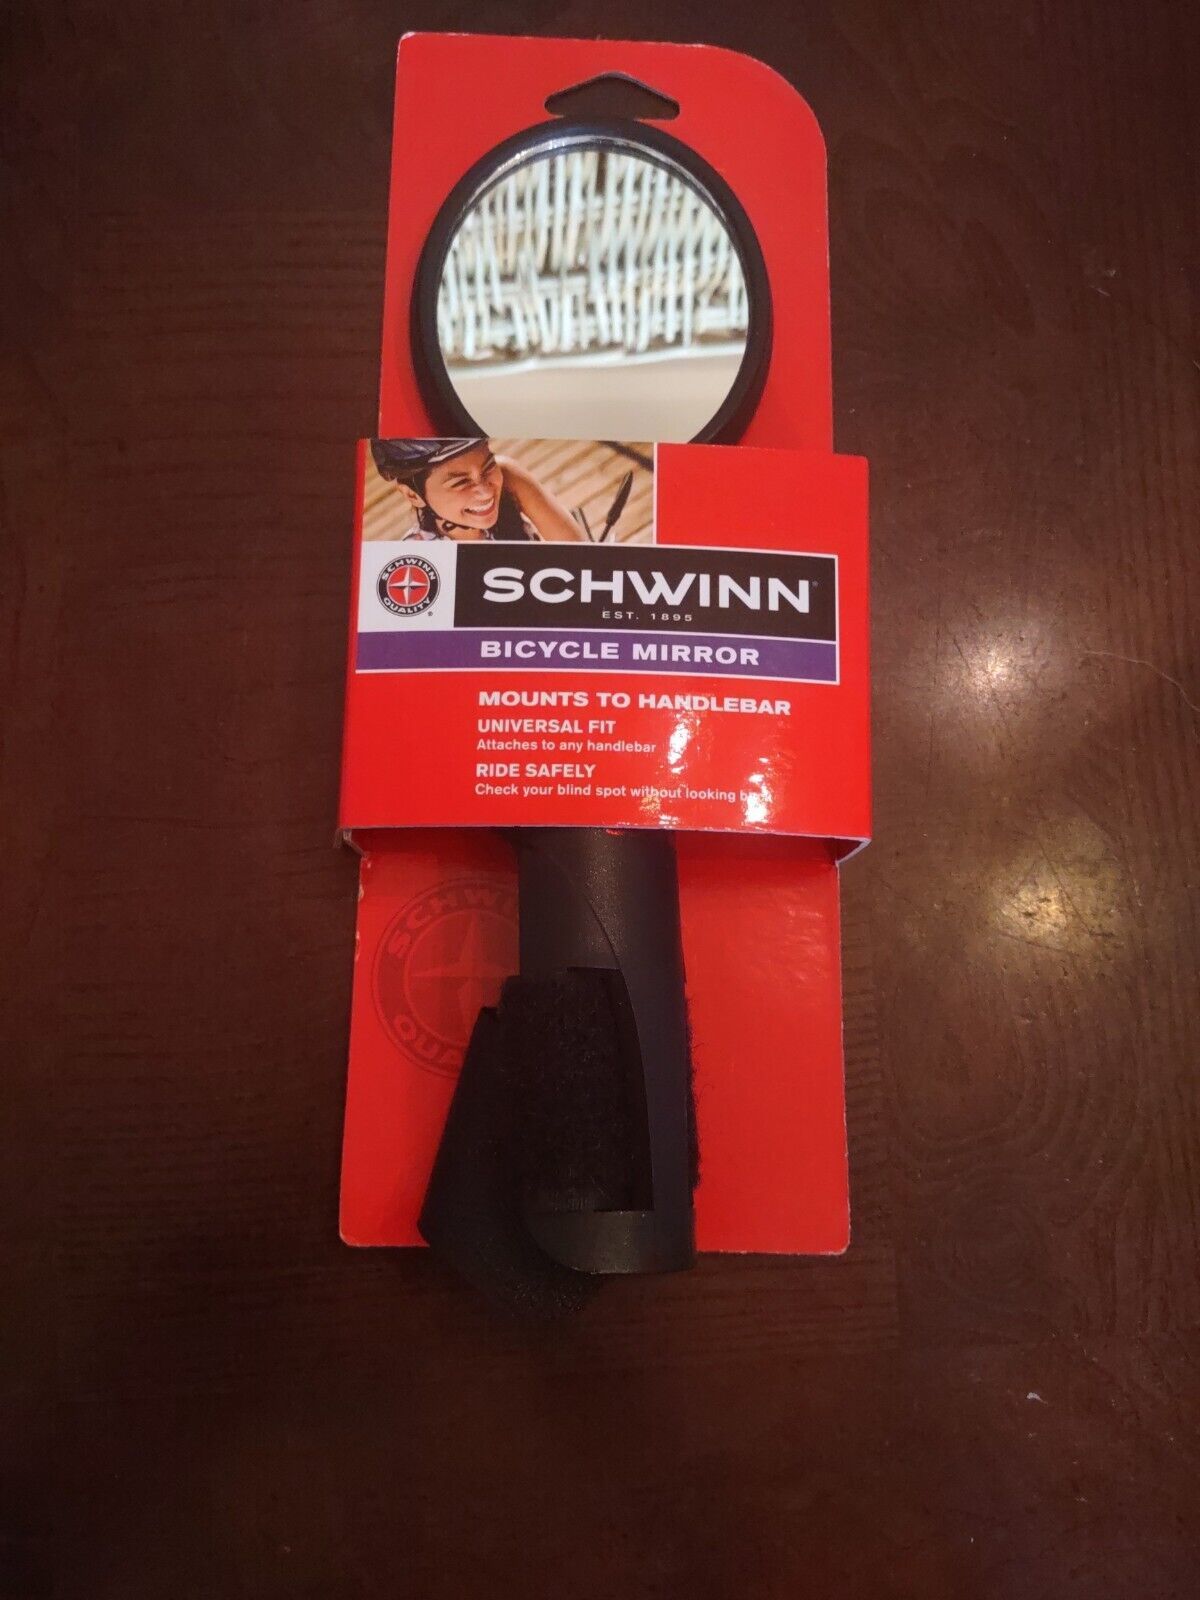 Schwinn Universal Fit Bicycle Mirror With Adjustable View - $10.77